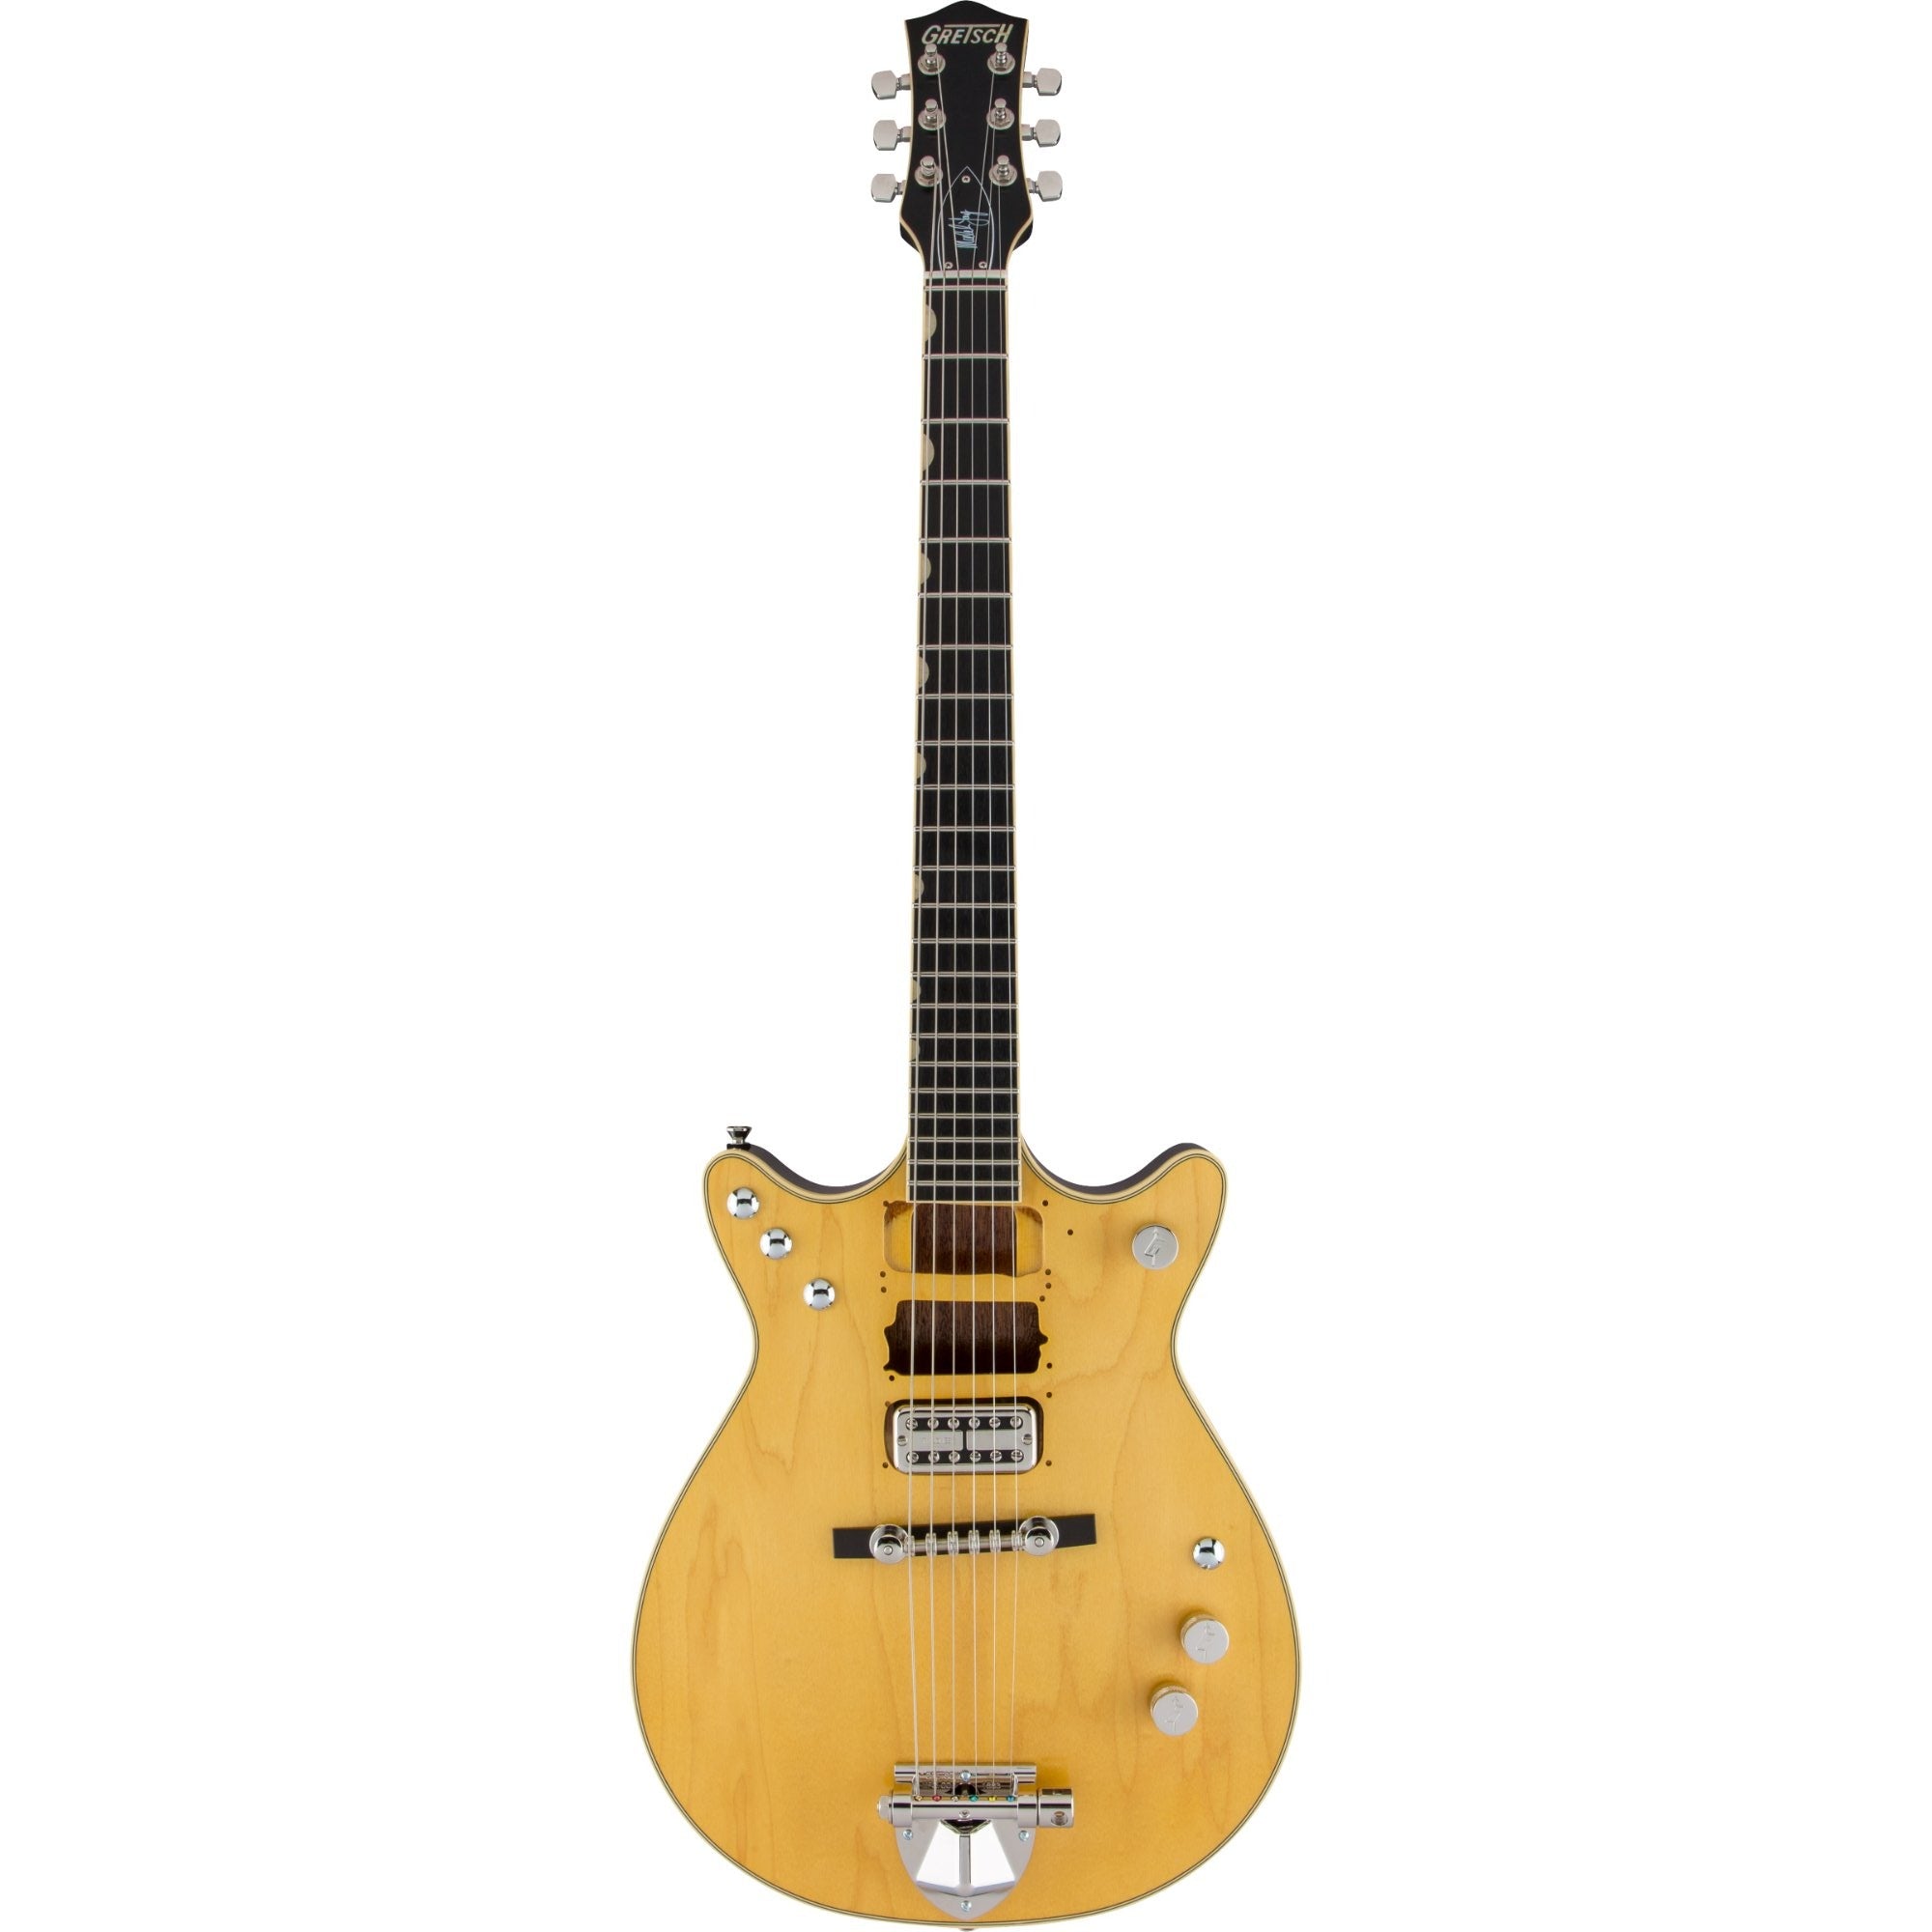 Gretsch G6131-MY Malcolm Young Signature Jet, Natural